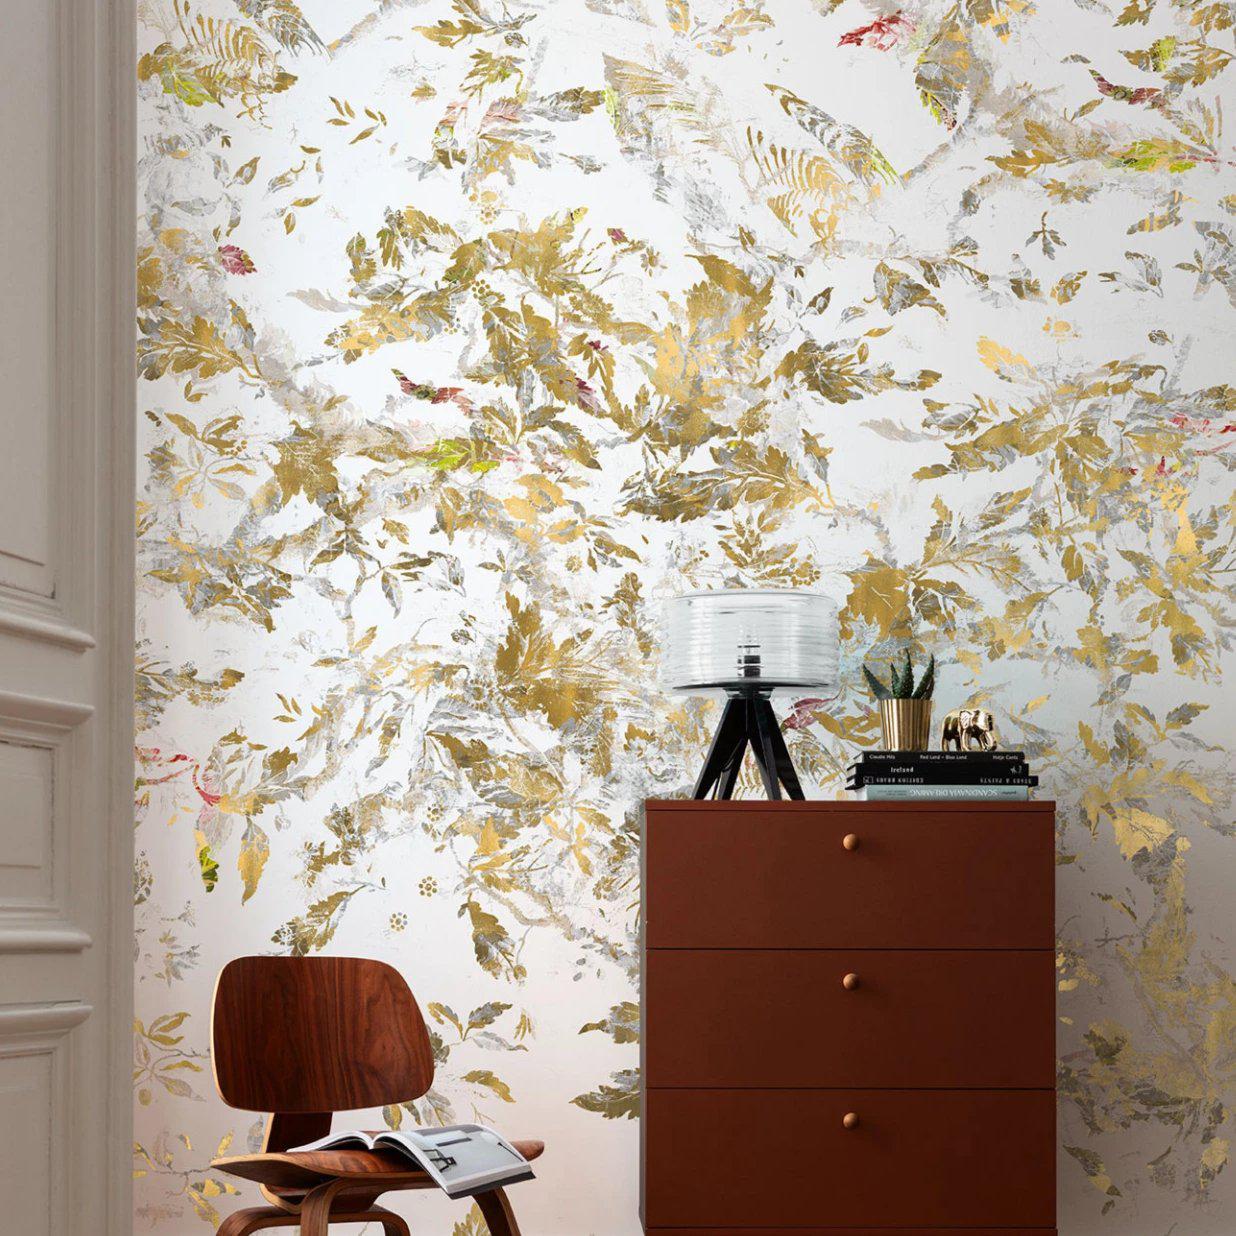 Gold Fall Mural Wallpaper-Wall Decor-ECO MURALS, FLORAL WALLPAPERS, MURALS, MURALS / WALLPAPERS, NON-WOVEN WALLPAPER-Forest Homes-Nature inspired decor-Nature decor